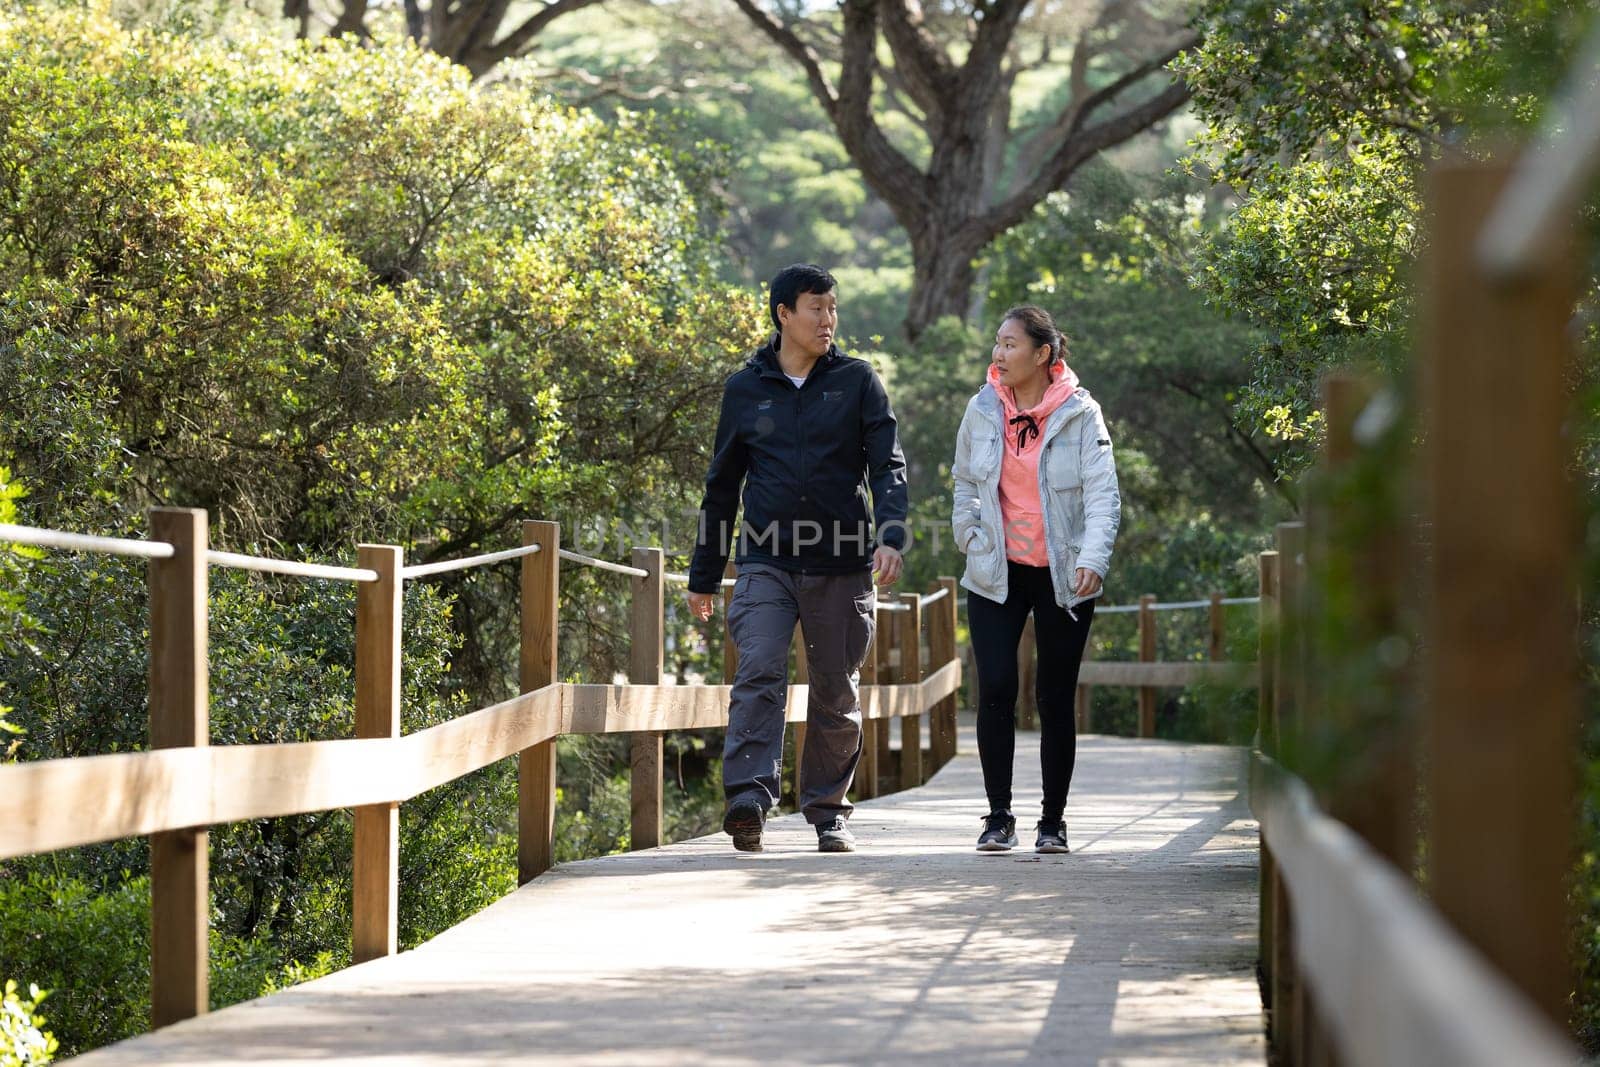 A man and woman are walking on a wooden bridge. The man is wearing a black jacket and the woman is wearing a pink jacket. They are holding hands and seem to be enjoying each other's company